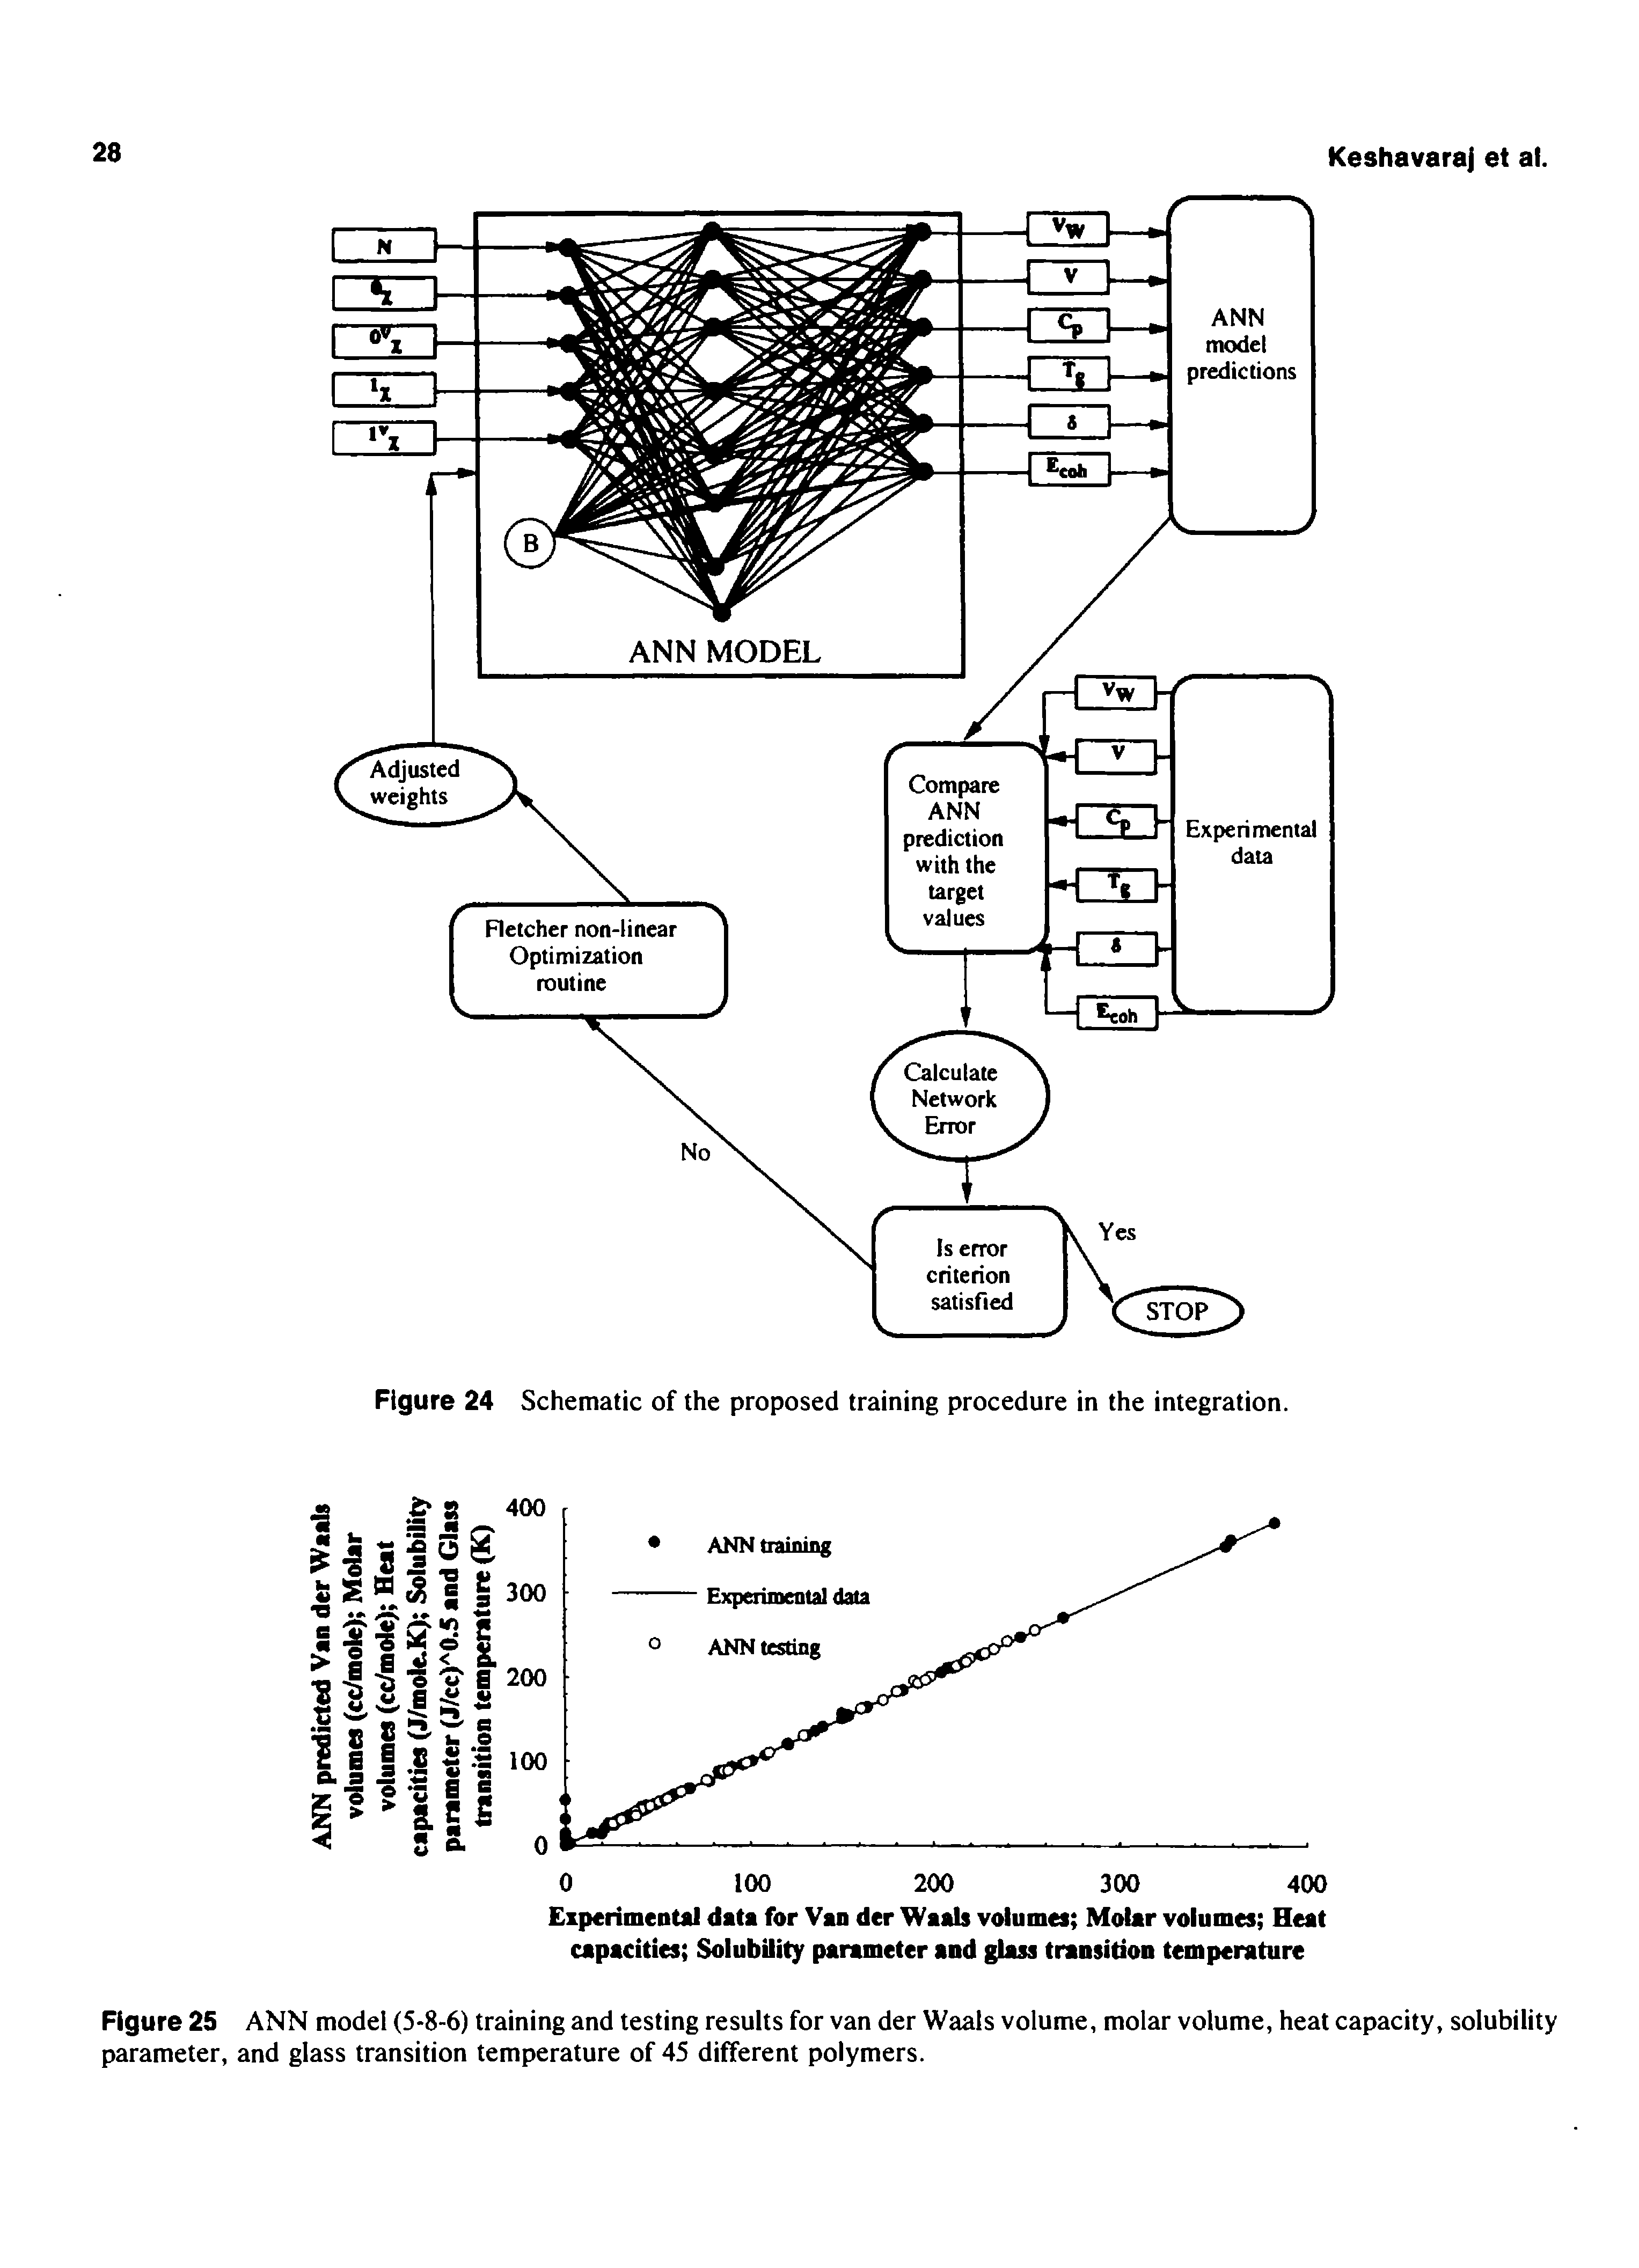 Figure 25 ANN model (5-8-6) training and testing results for van der Waals volume, molar volume, heat capacity, solubility parameter, and glass transition temperature of 45 different polymers.